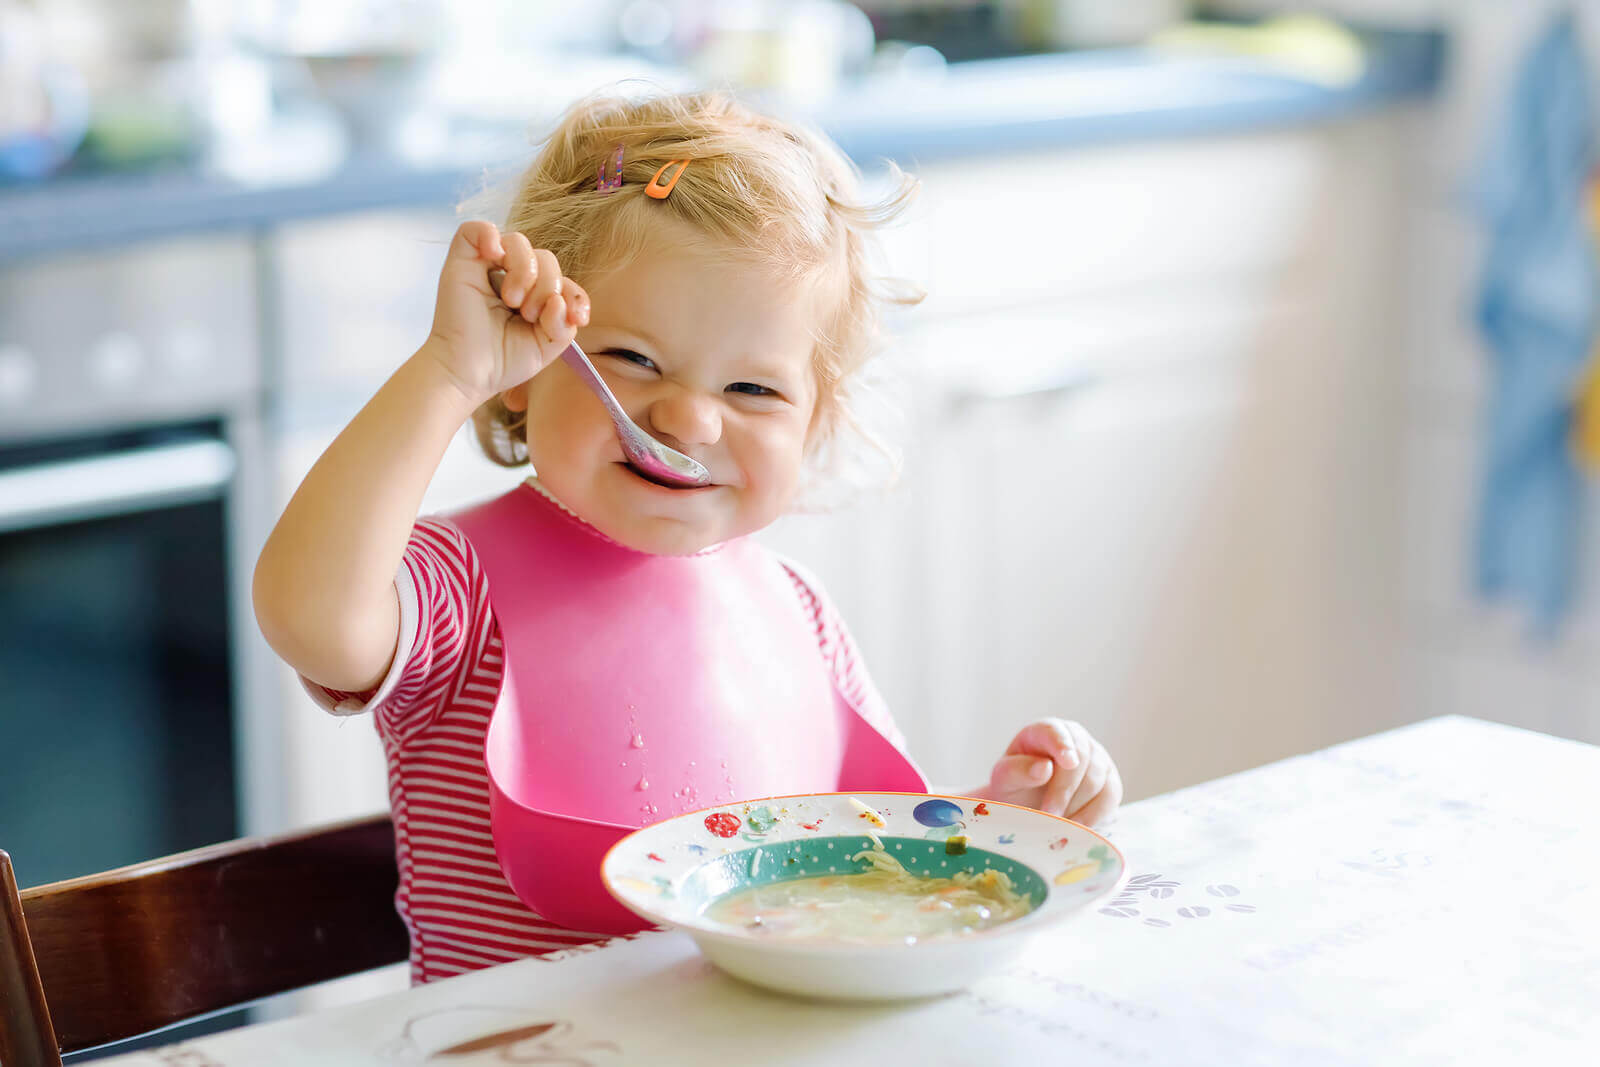 When and How to Introduce Gluten into Your Baby's Diet